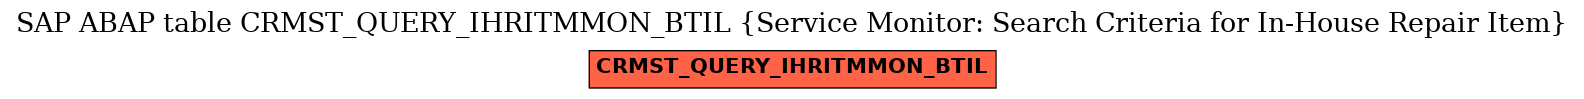 E-R Diagram for table CRMST_QUERY_IHRITMMON_BTIL (Service Monitor: Search Criteria for In-House Repair Item)